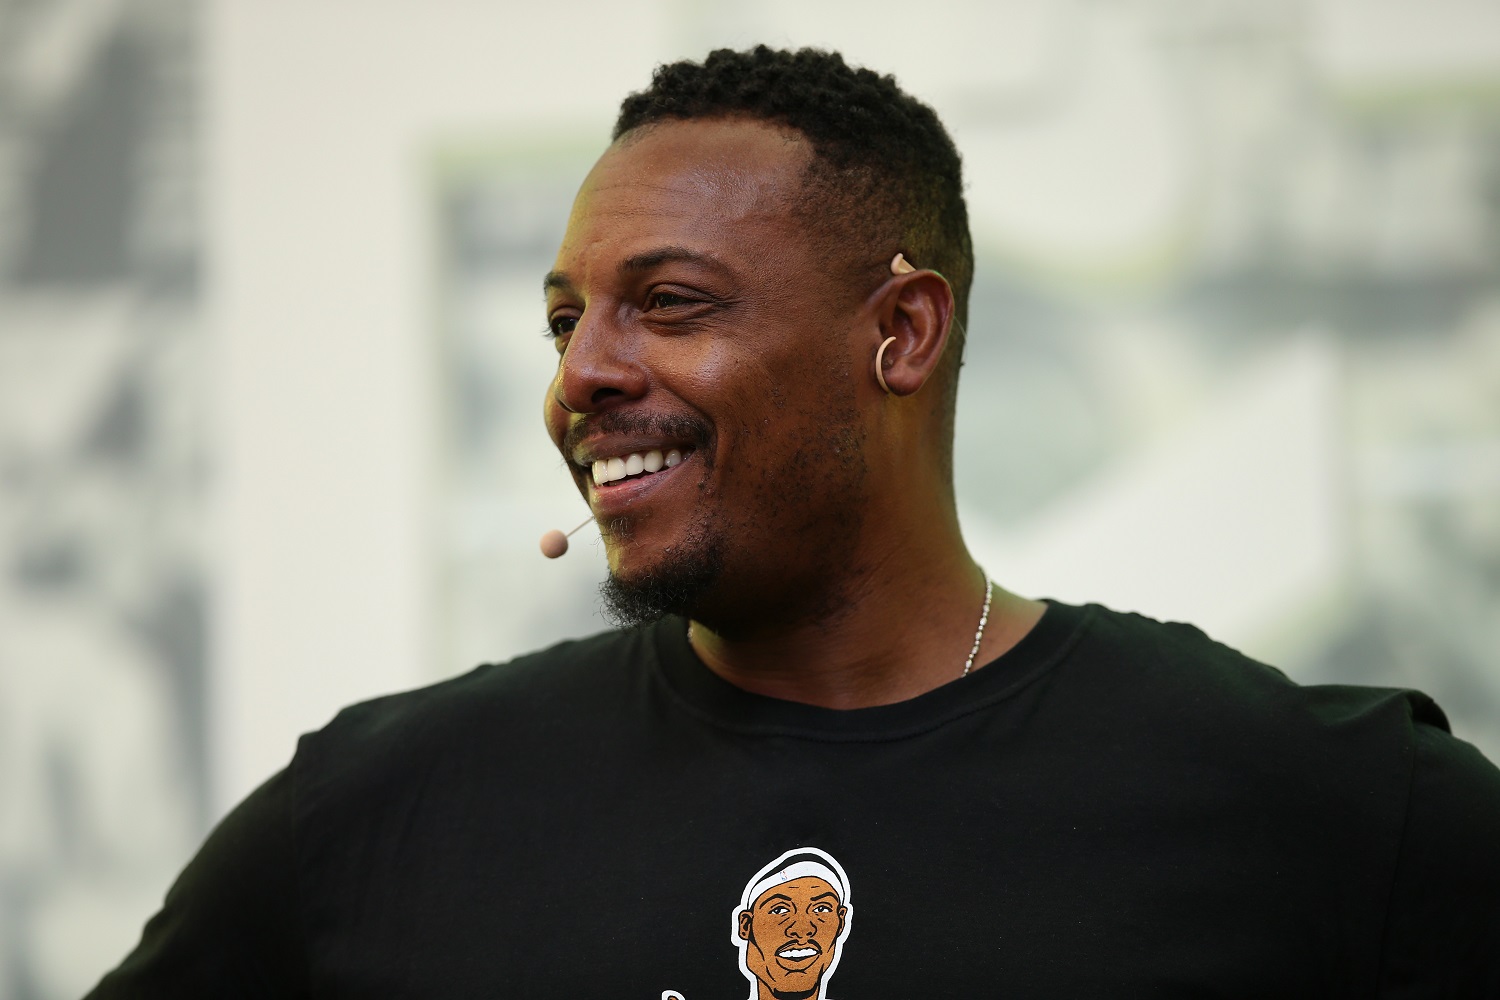 Paul Pierce joined ESPN after 19 Hall of Fame-worthy seasons as an NBA player, primarily with the Boston Celtics.